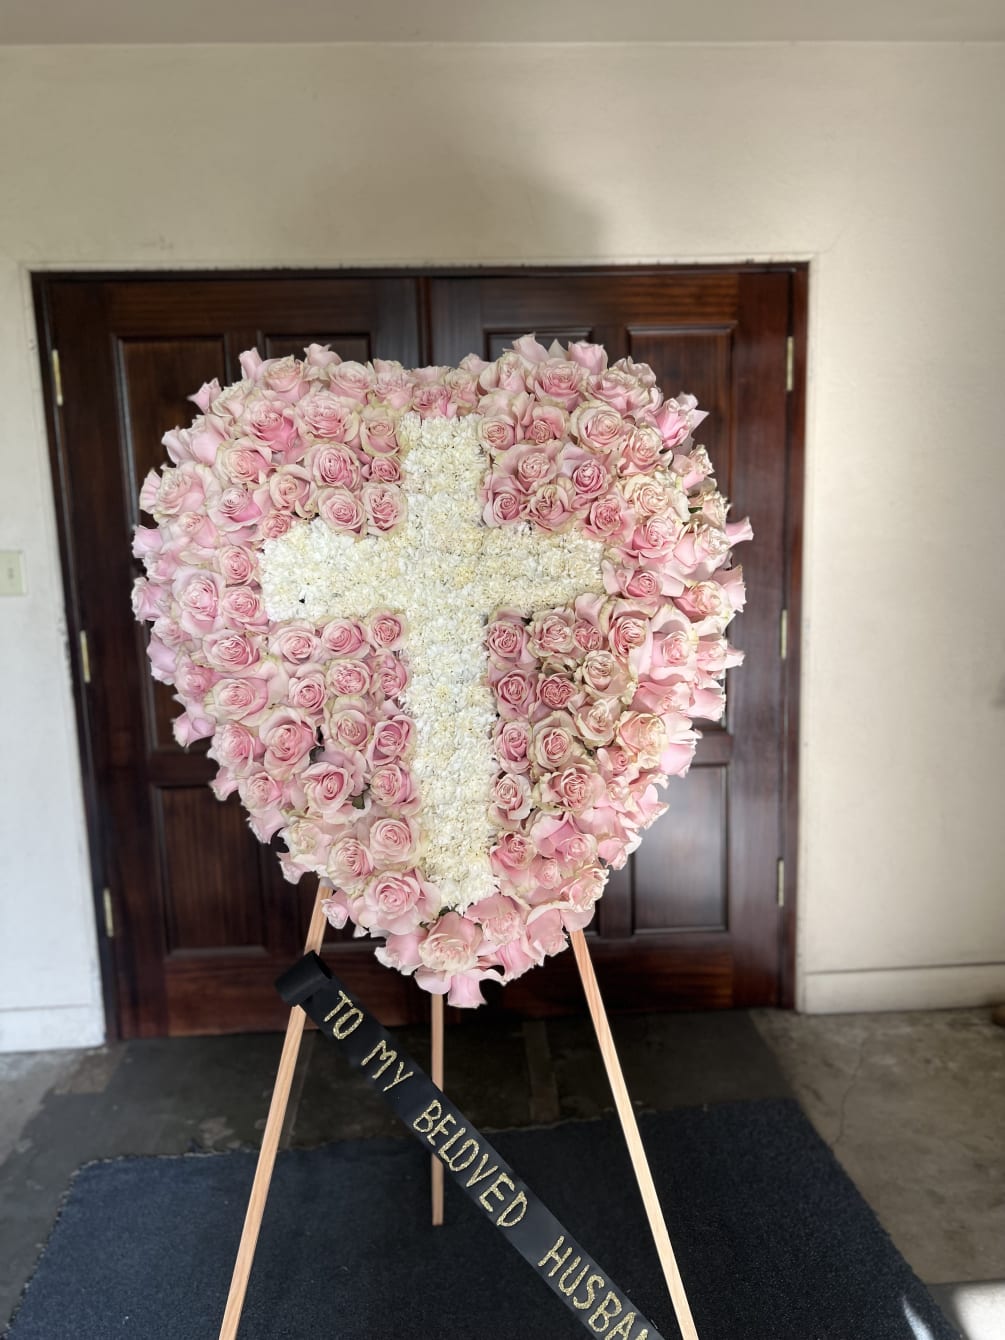 Full heart spray with roses and white carnation cross 